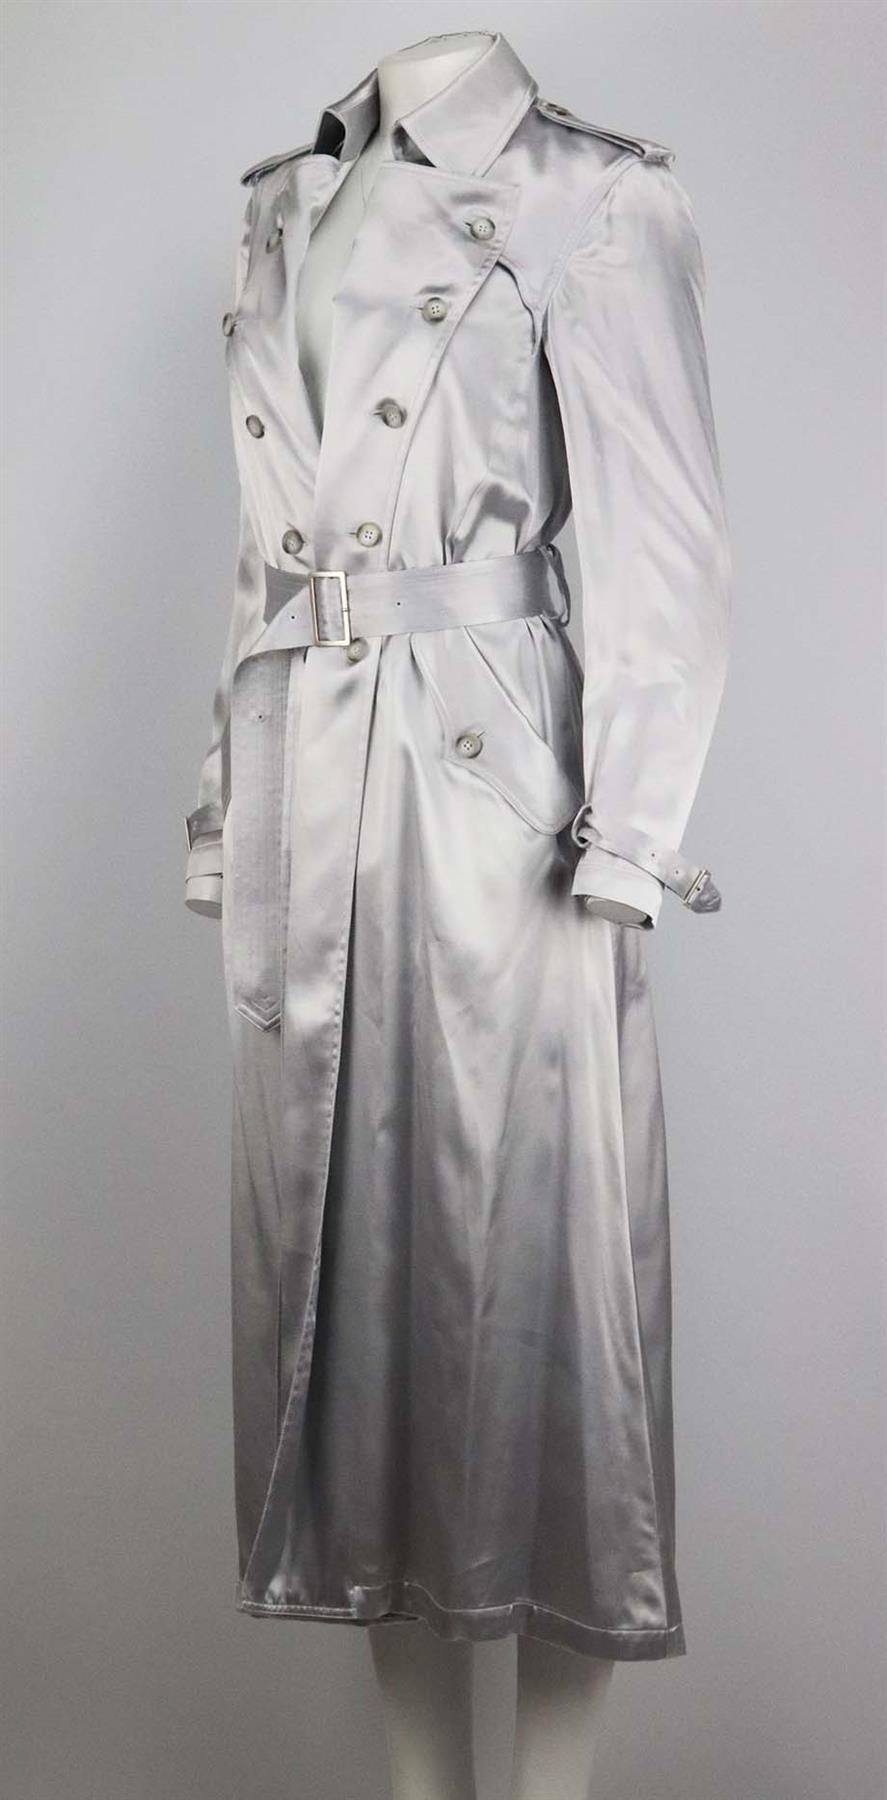 This trench coat by Fleur du Mal is made from lustrous silver satin that drapes beautifully and creates such an elevated vibe, it's designed in a slightly loose, double-breasted silhouette and has traditional shoulder epaulettes and buckle-fastening